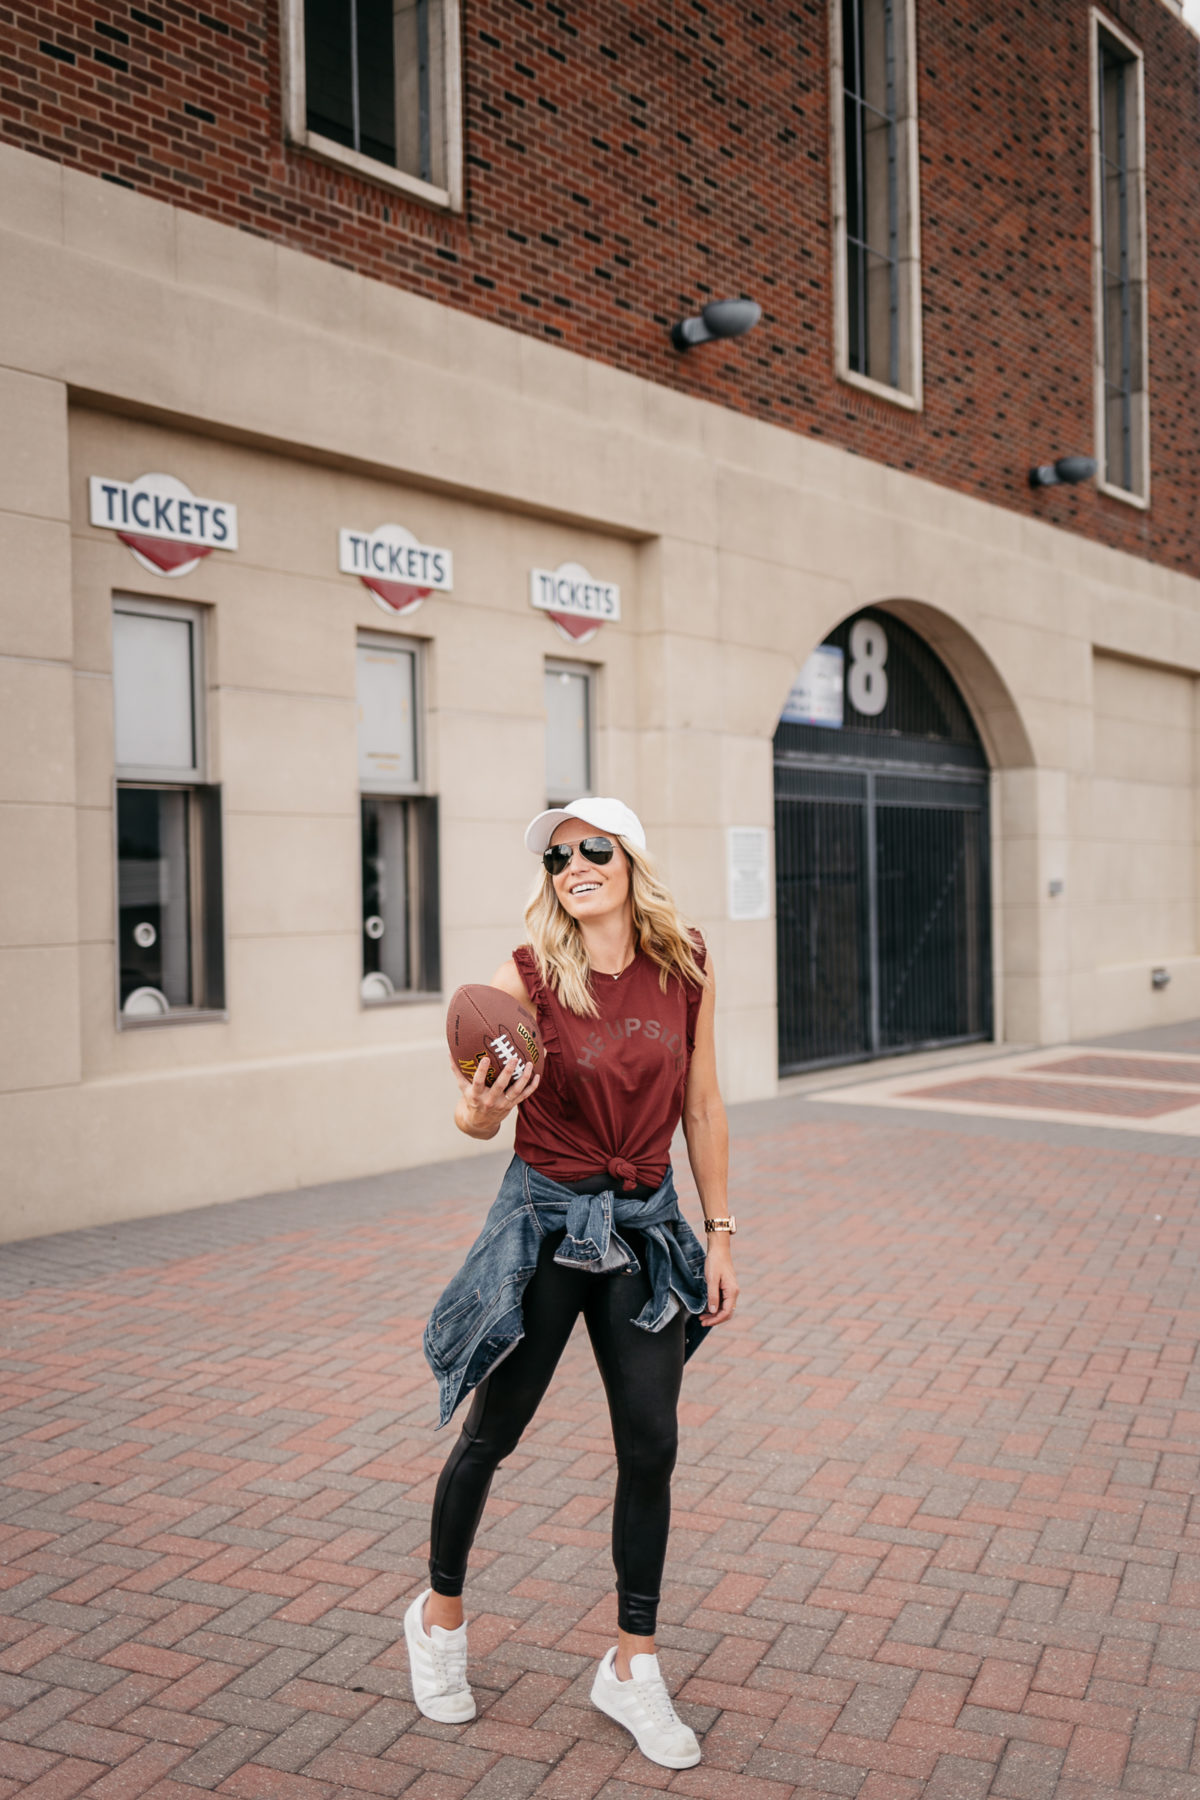 Cute Gameday Outfits One Small Blonde Dallas Fashion Blogger